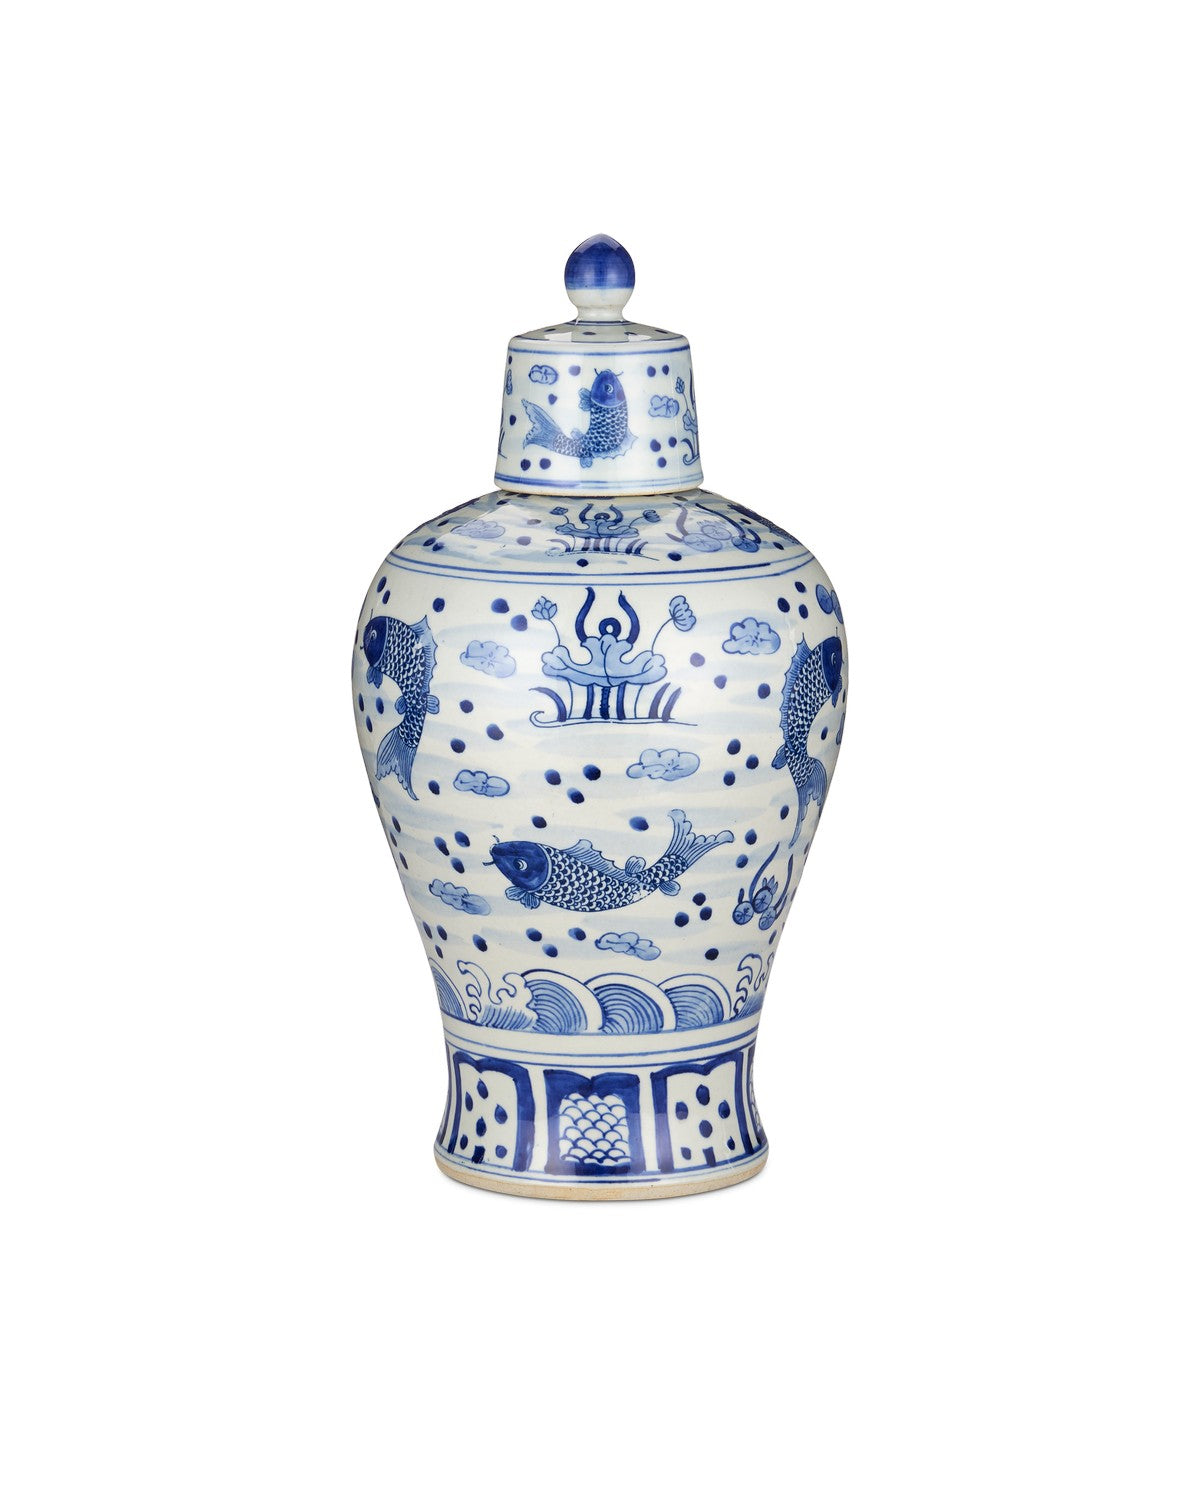 Currey and Company - 1200-0842 - Jar - South Sea - Imperial Blue/Off White